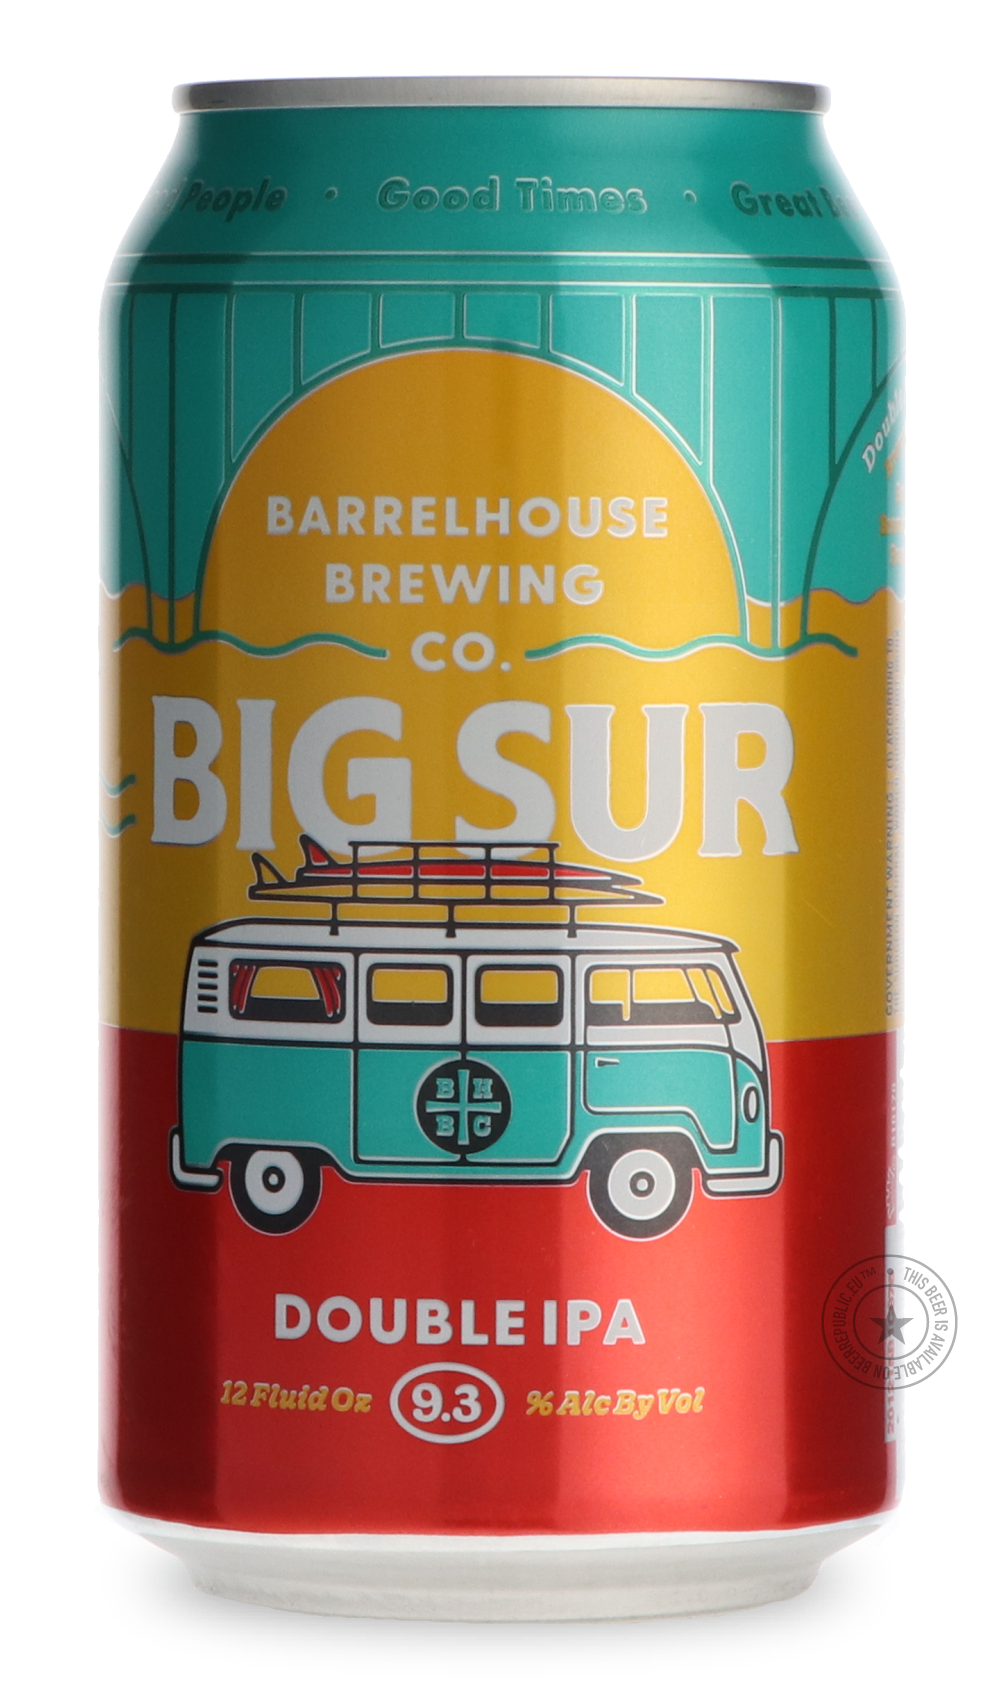 -BarrelHouse- Big Sur-IPA- Only @ Beer Republic - The best online beer store for American & Canadian craft beer - Buy beer online from the USA and Canada - Bier online kopen - Amerikaans bier kopen - Craft beer store - Craft beer kopen - Amerikanisch bier kaufen - Bier online kaufen - Acheter biere online - IPA - Stout - Porter - New England IPA - Hazy IPA - Imperial Stout - Barrel Aged - Barrel Aged Imperial Stout - Brown - Dark beer - Blond - Blonde - Pilsner - Lager - Wheat - Weizen - Amber - Barley Wine